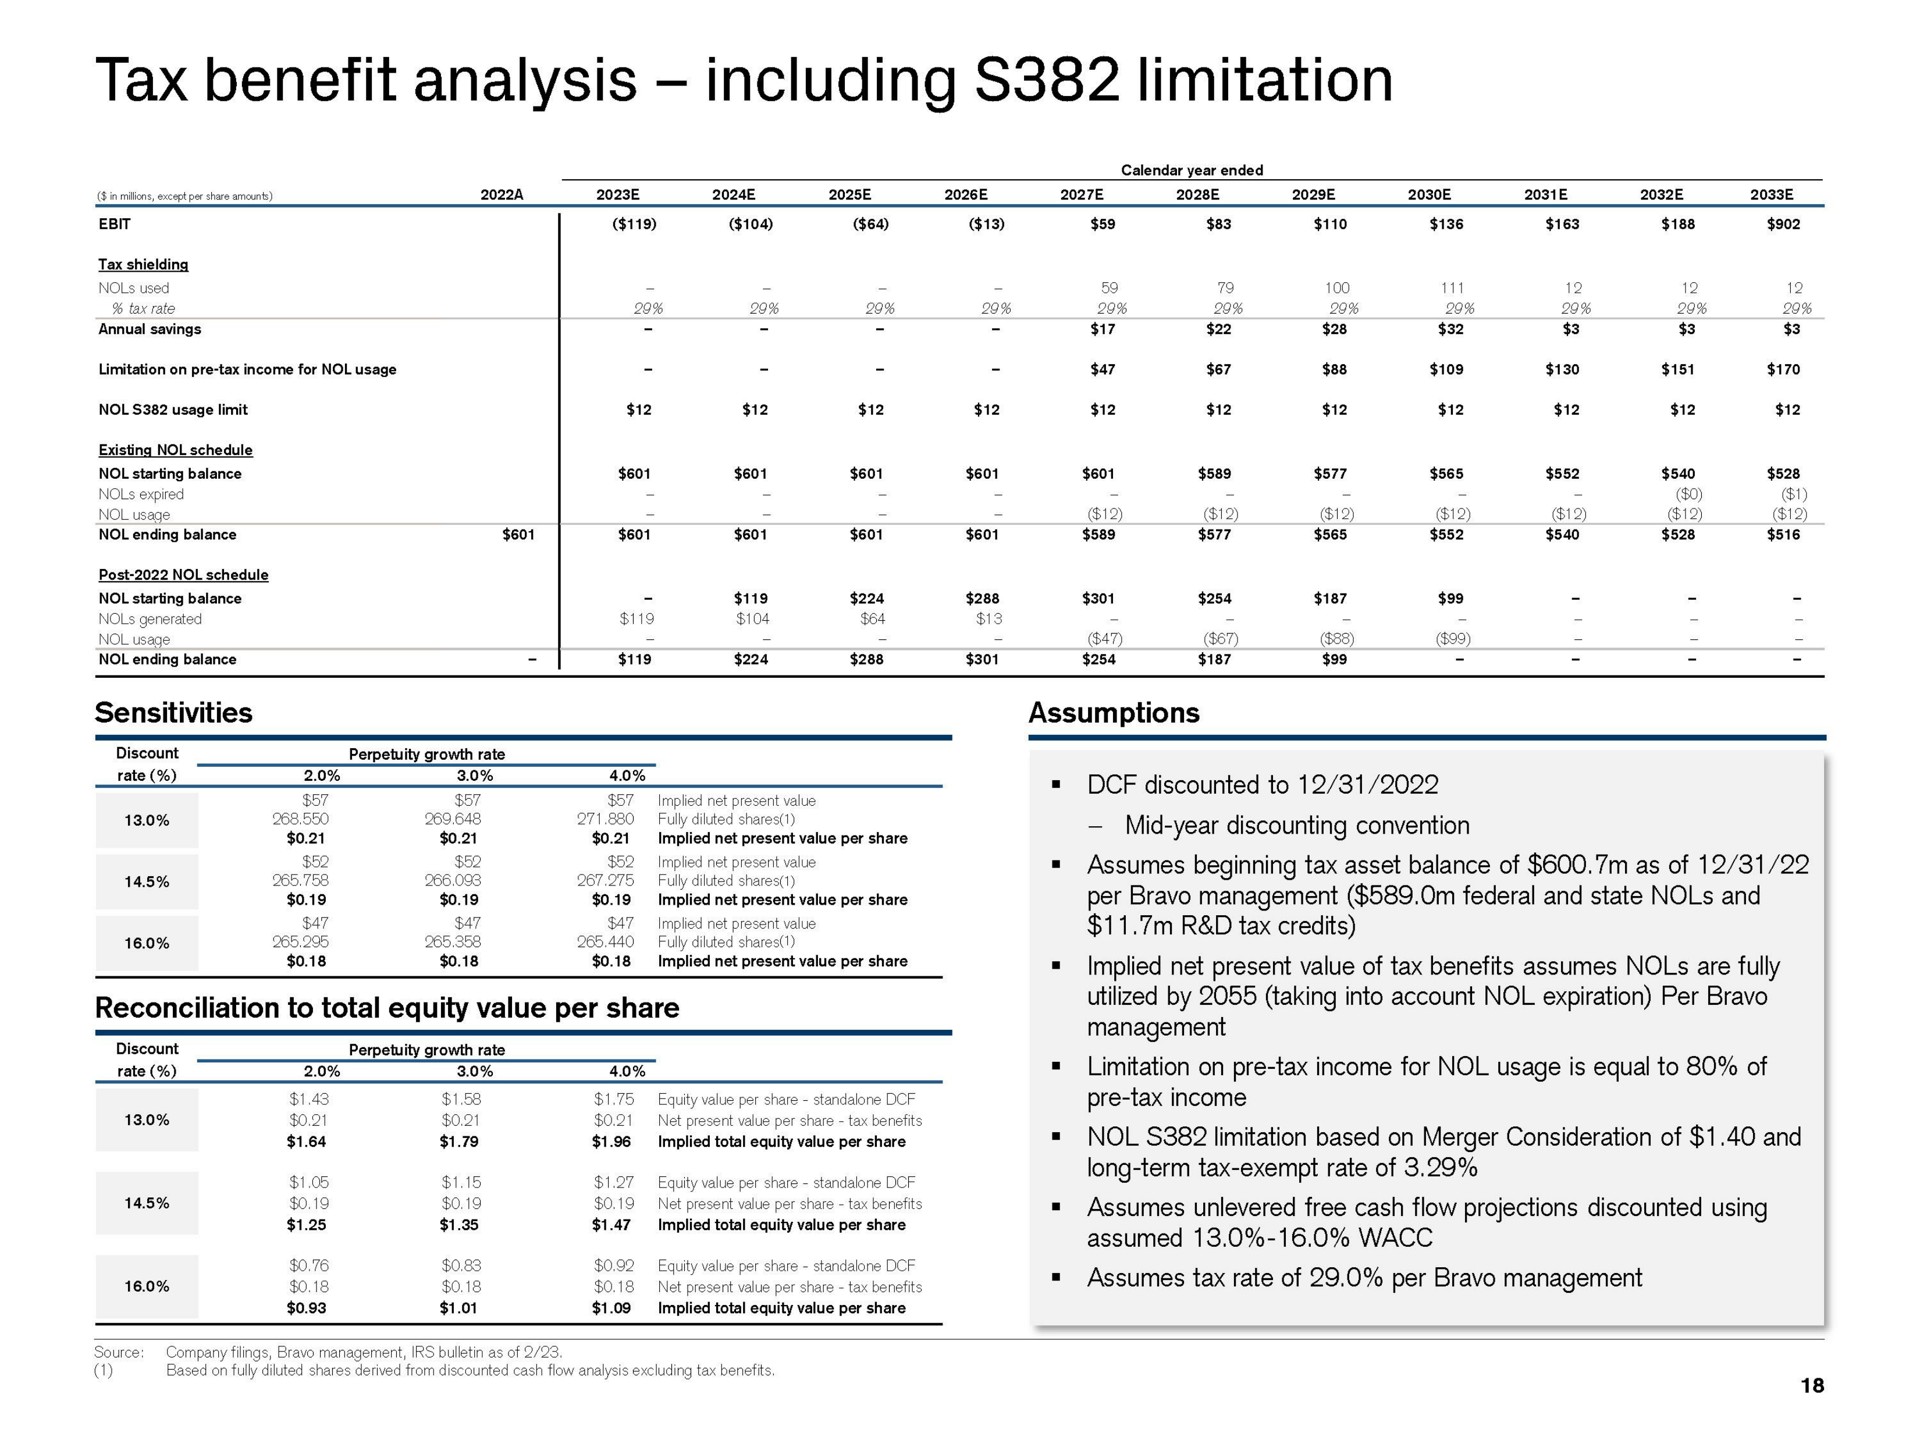 tax benefit analysis including limitation sensitivities discounted to assumed | Credit Suisse